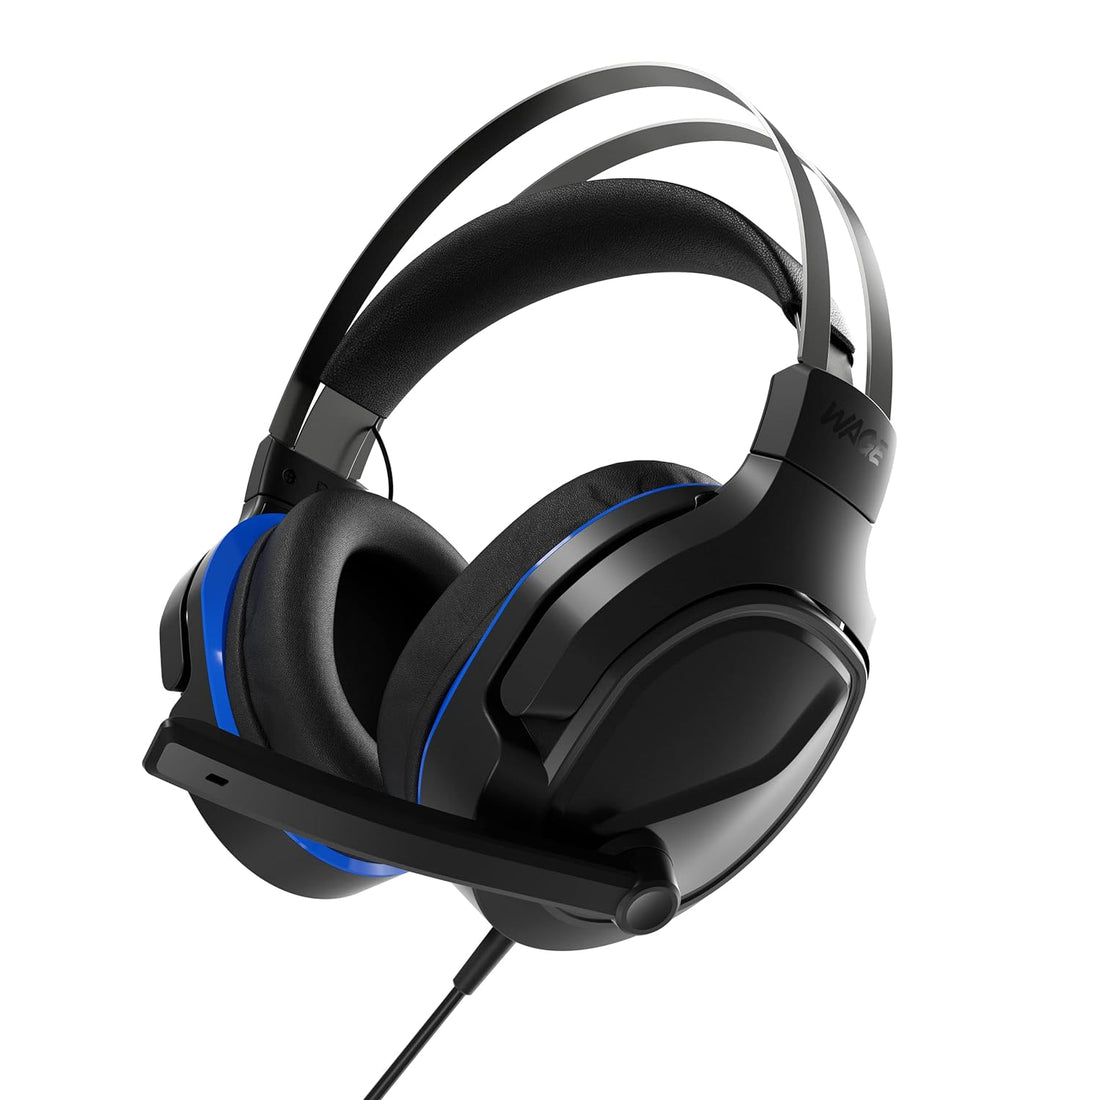 Wage Pro Universal Wired Gaming Headset - Black/Blue